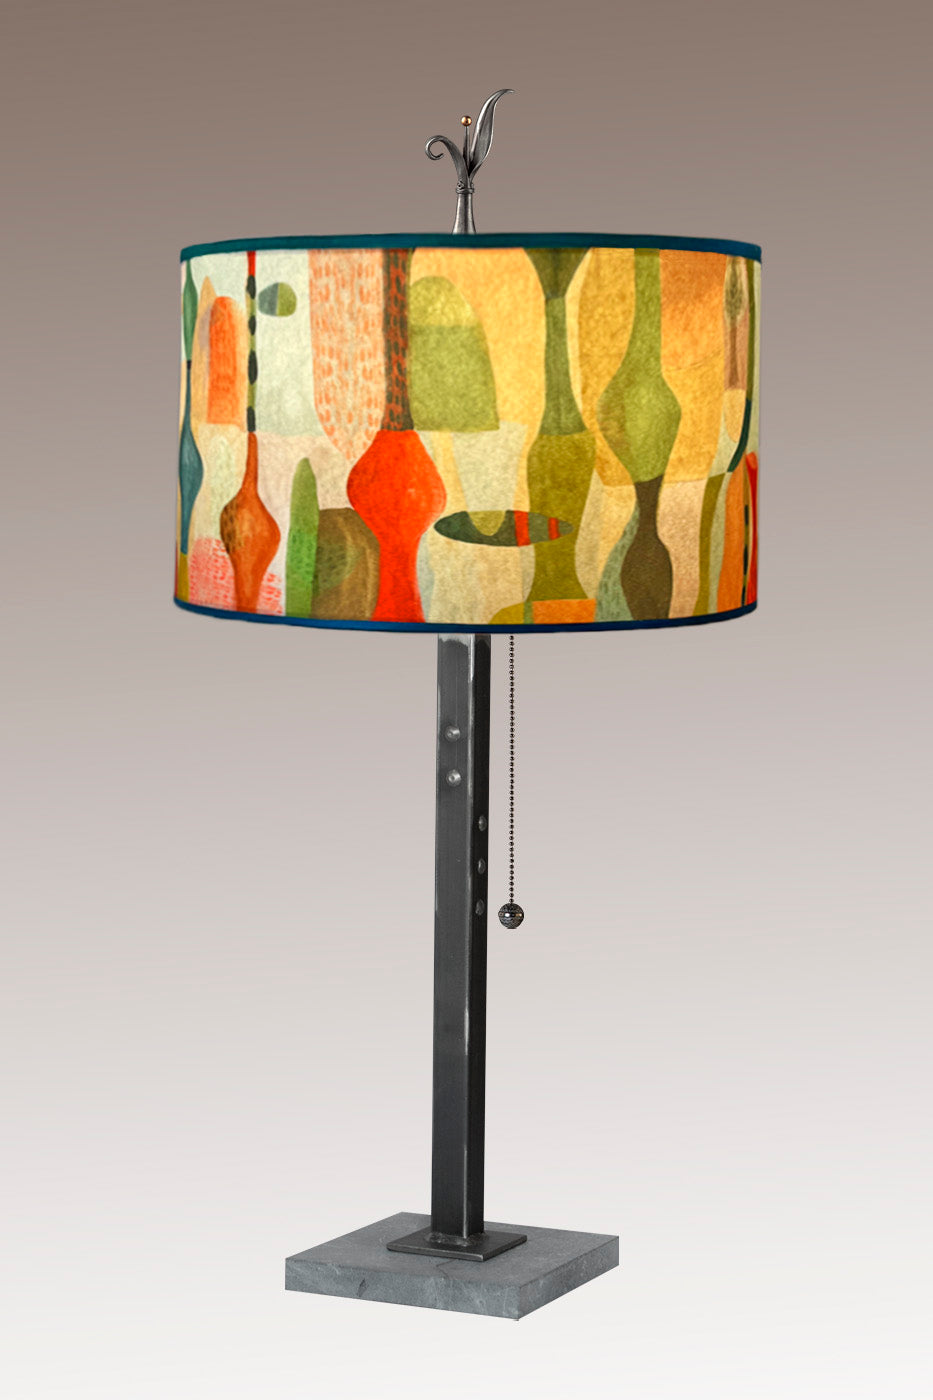 Janna Ugone & Co Table Lamp Steel Table Lamp with Large Drum Shade in Riviera in Poppy